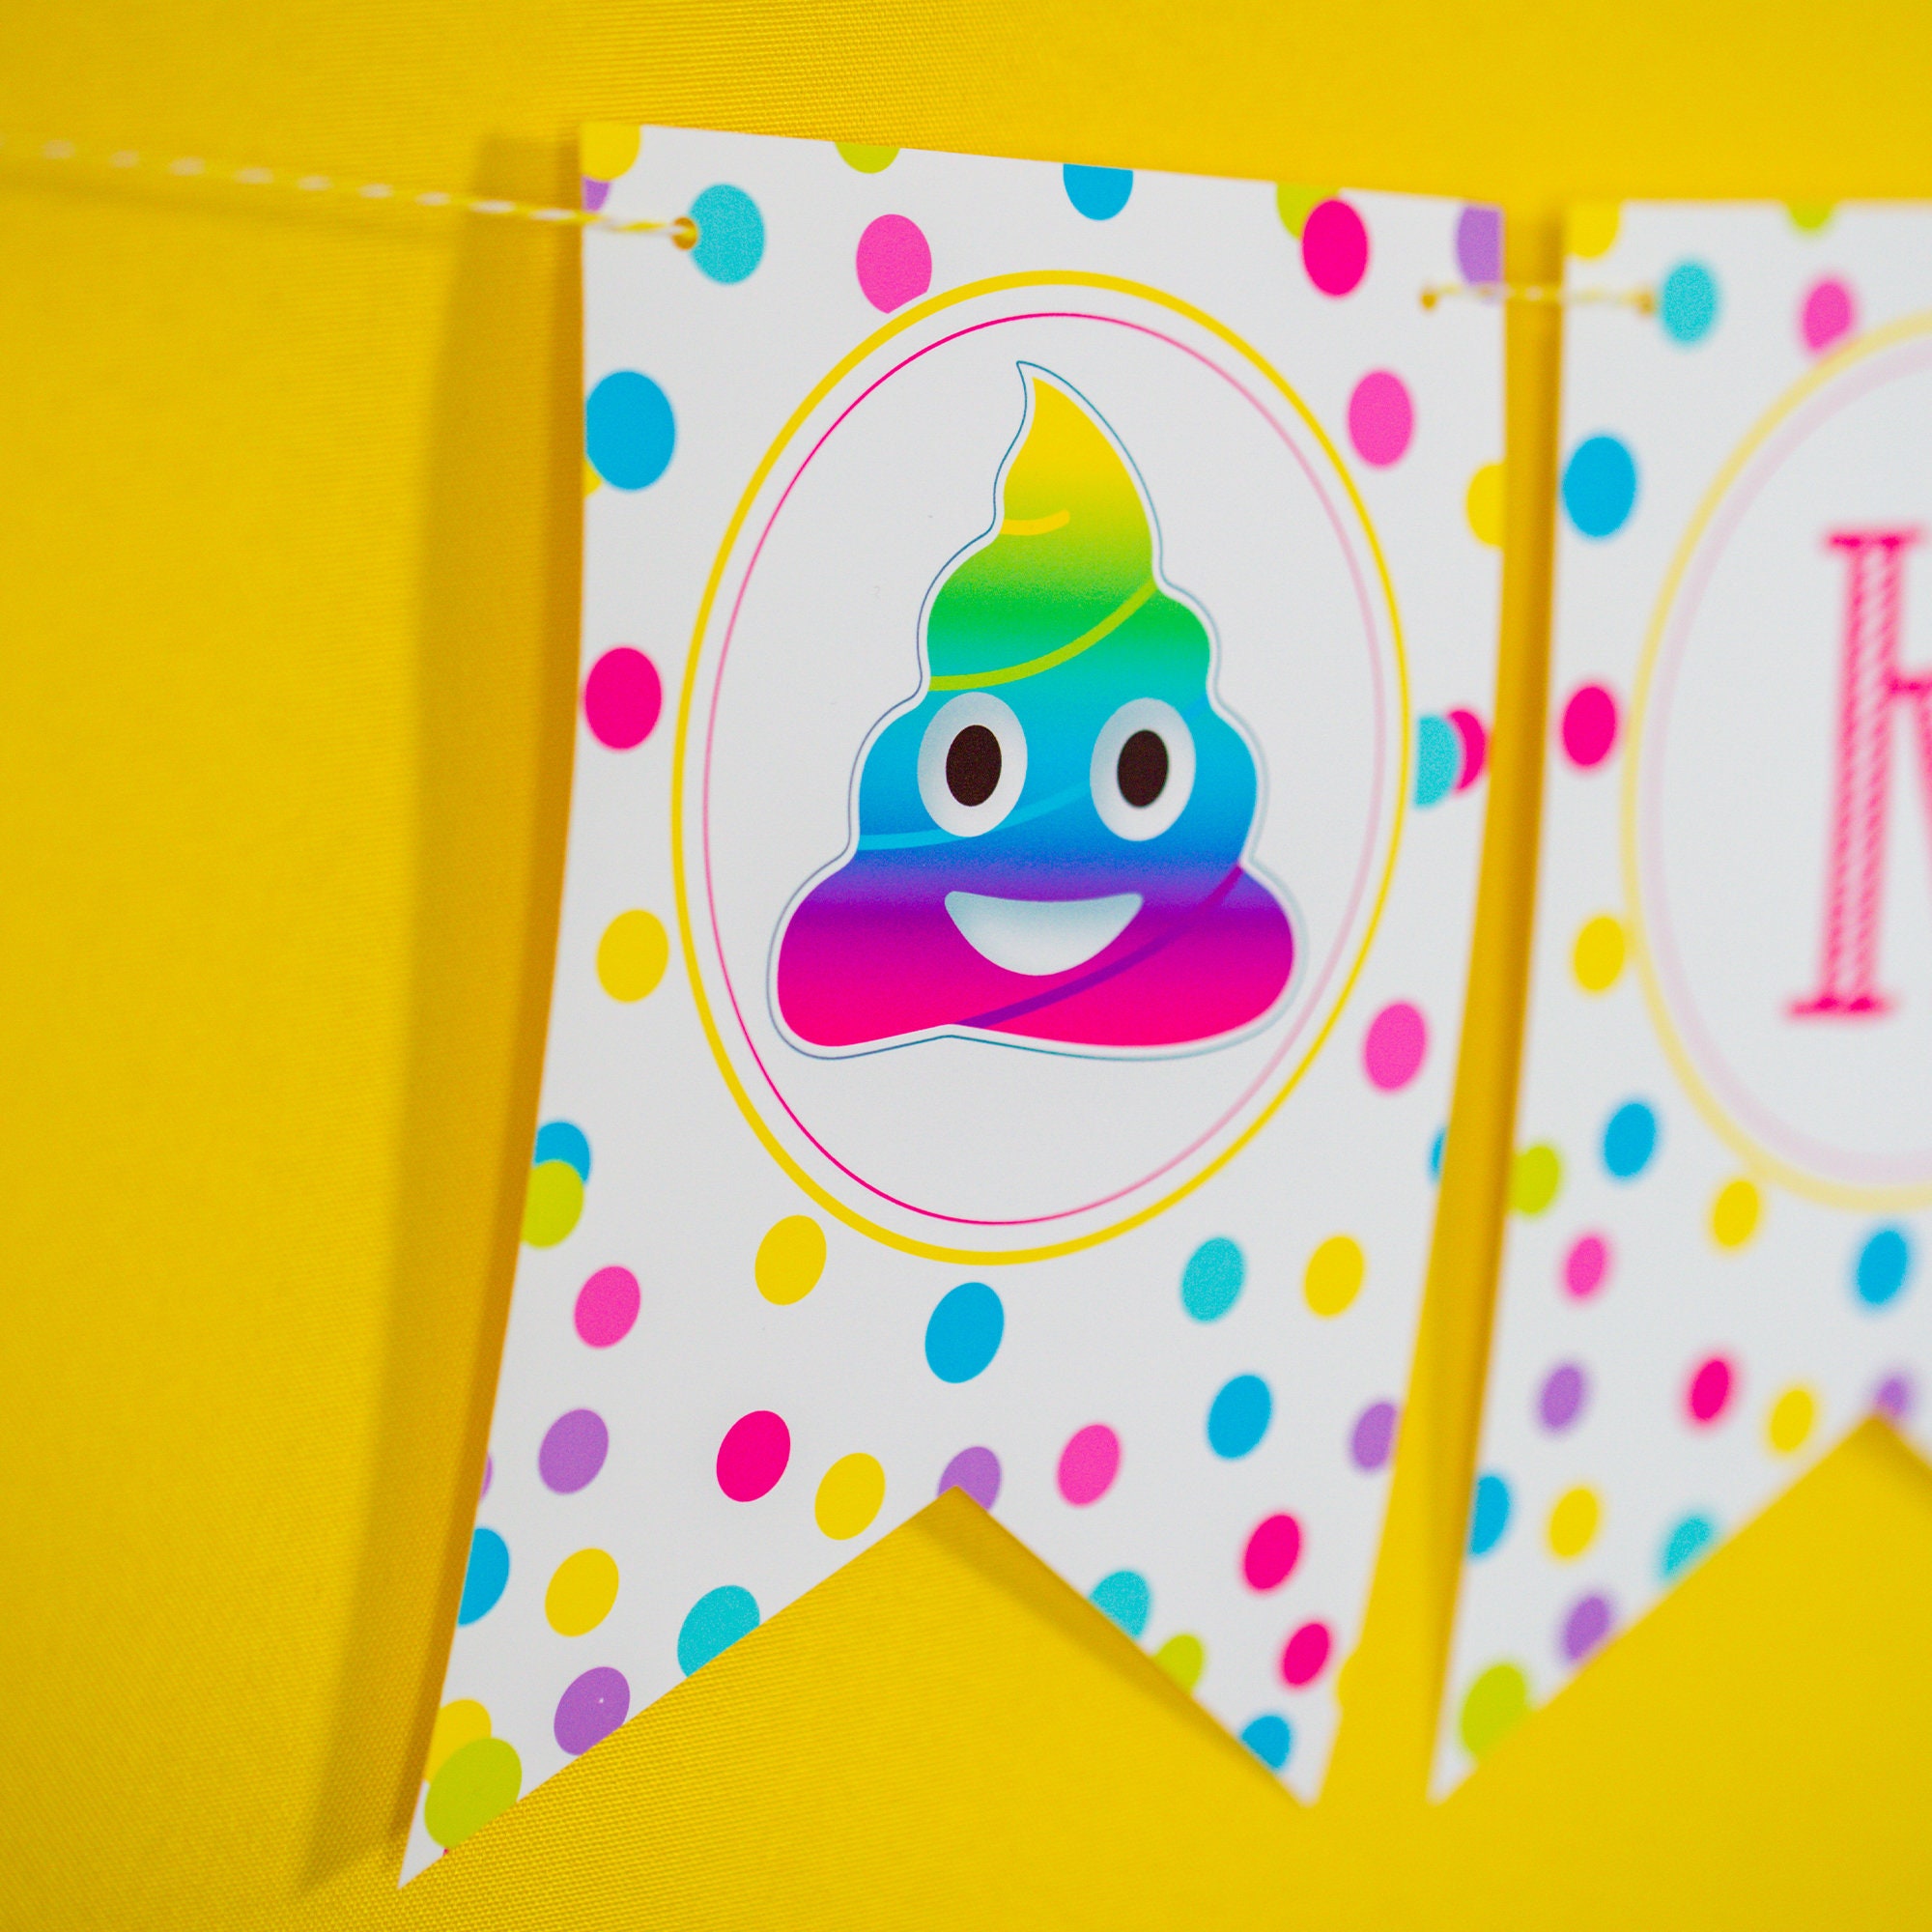 1pc Positive Poop Decoration, Creative Handmade Positive Energy Decoration  Card For Beautiful Home Party Emoticon